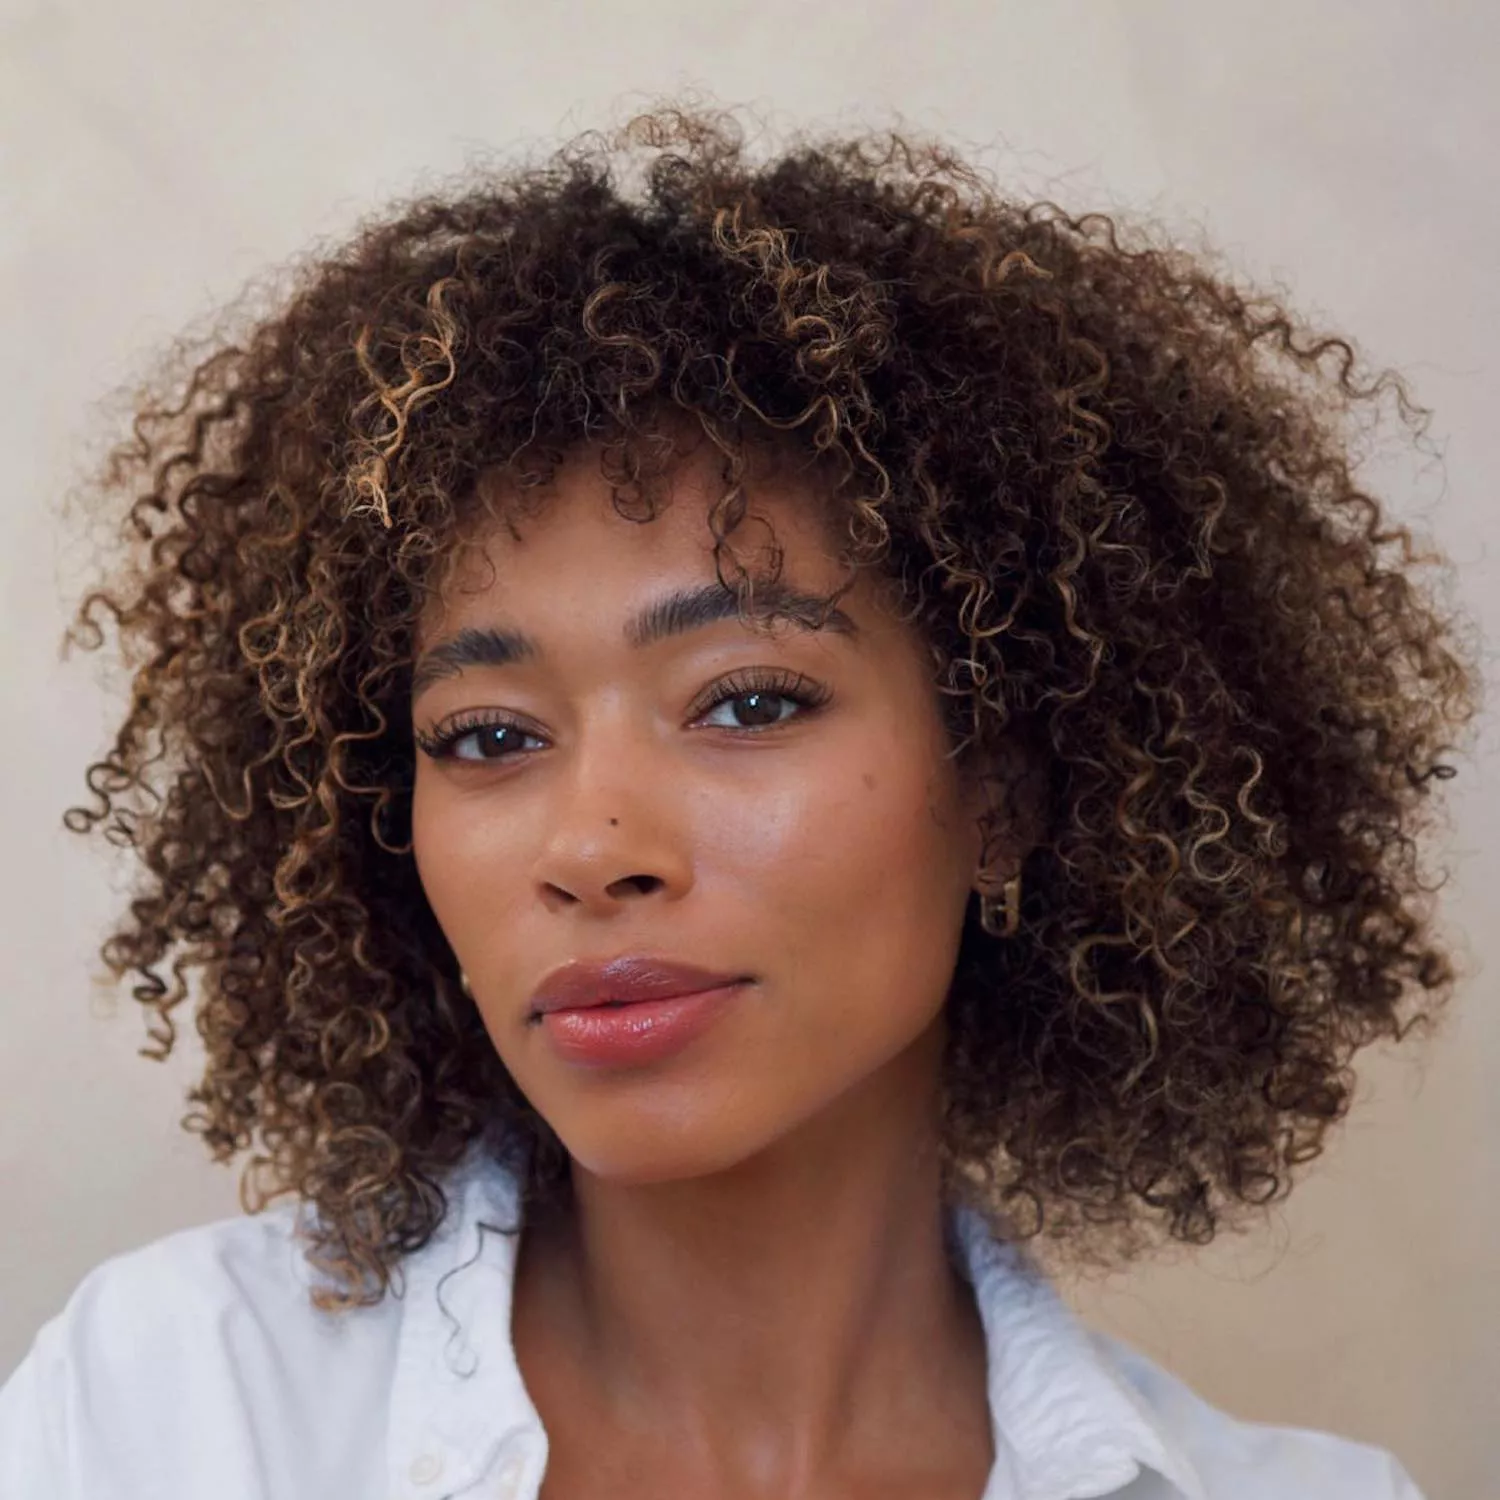 Content creator Lesley Buckle wears a naturally curly hairstyle with subtle linen blonde highlights